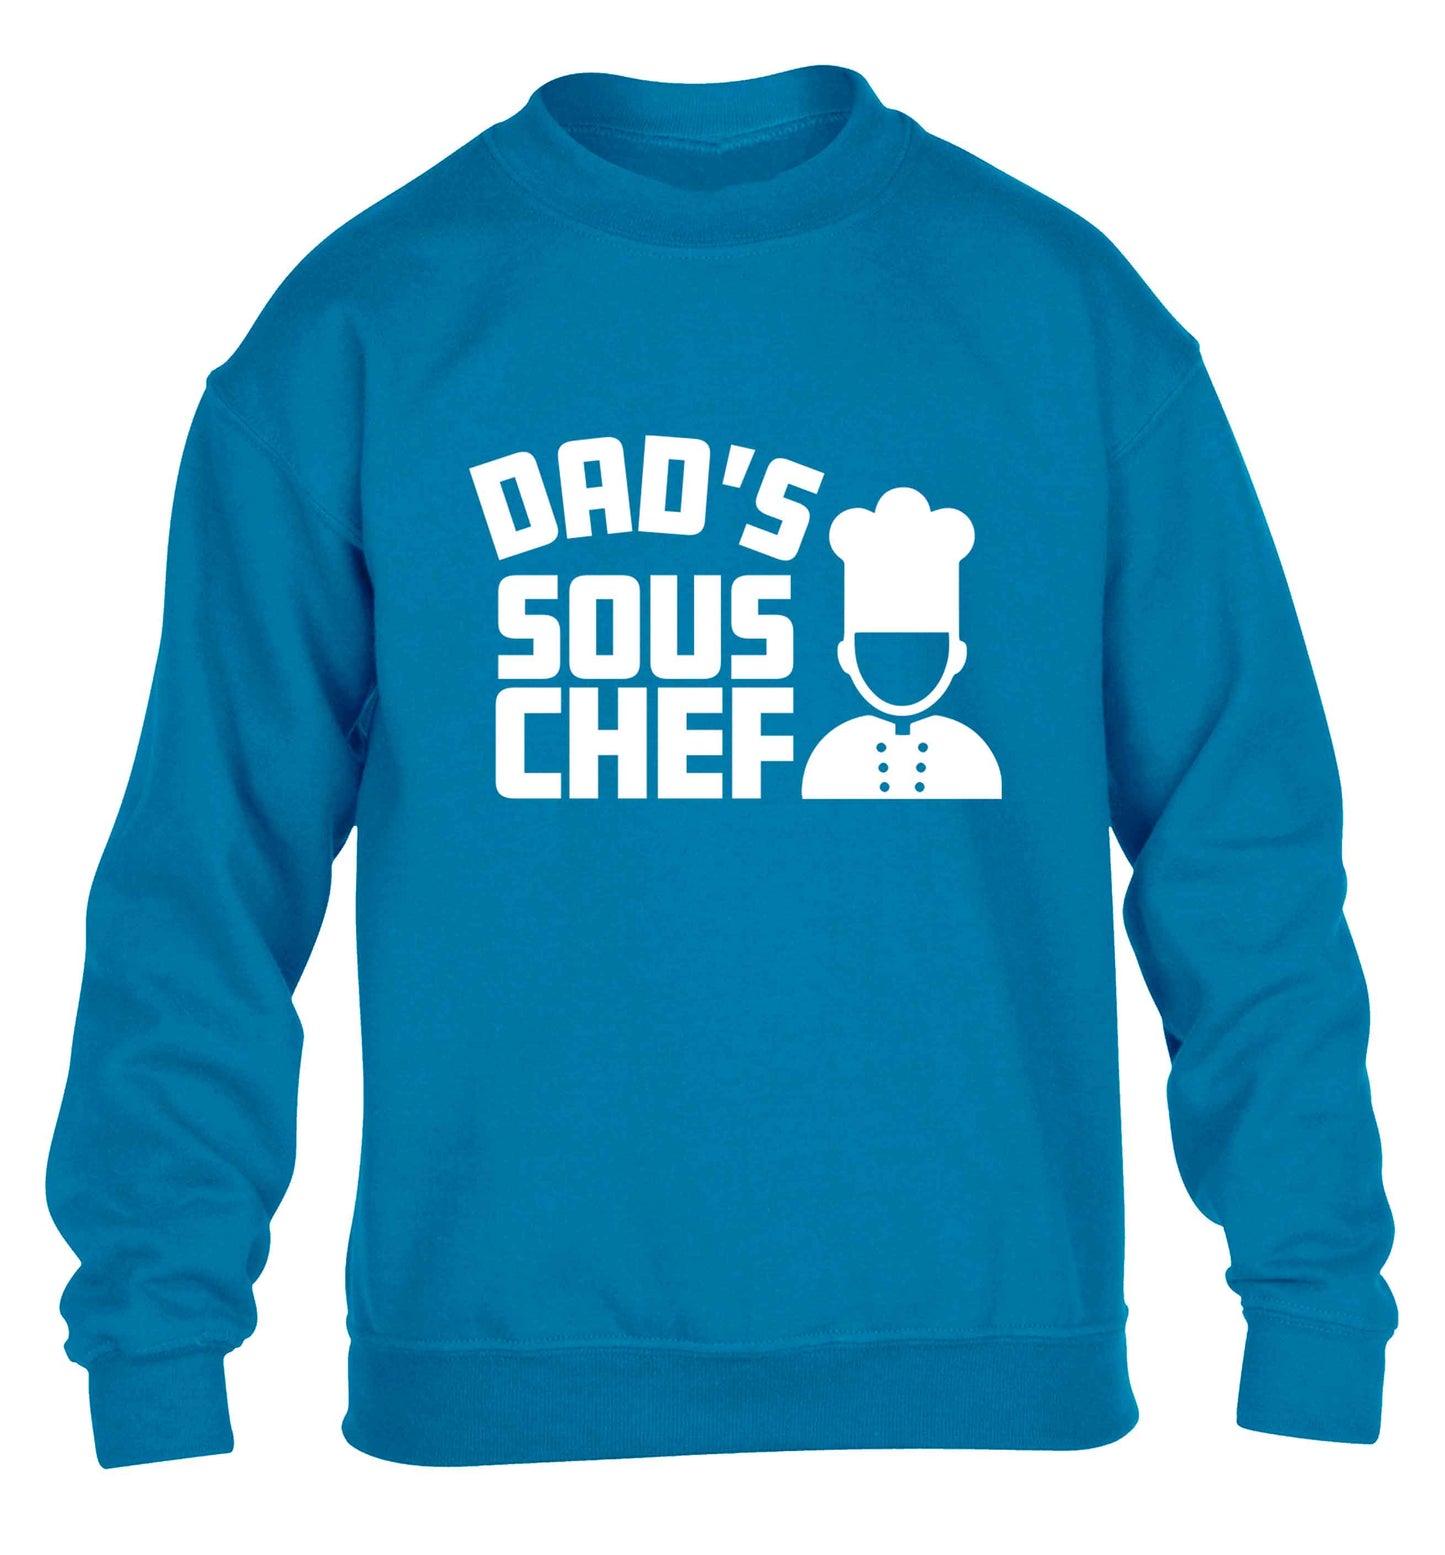 Dad's sous chef children's blue sweater 12-13 Years